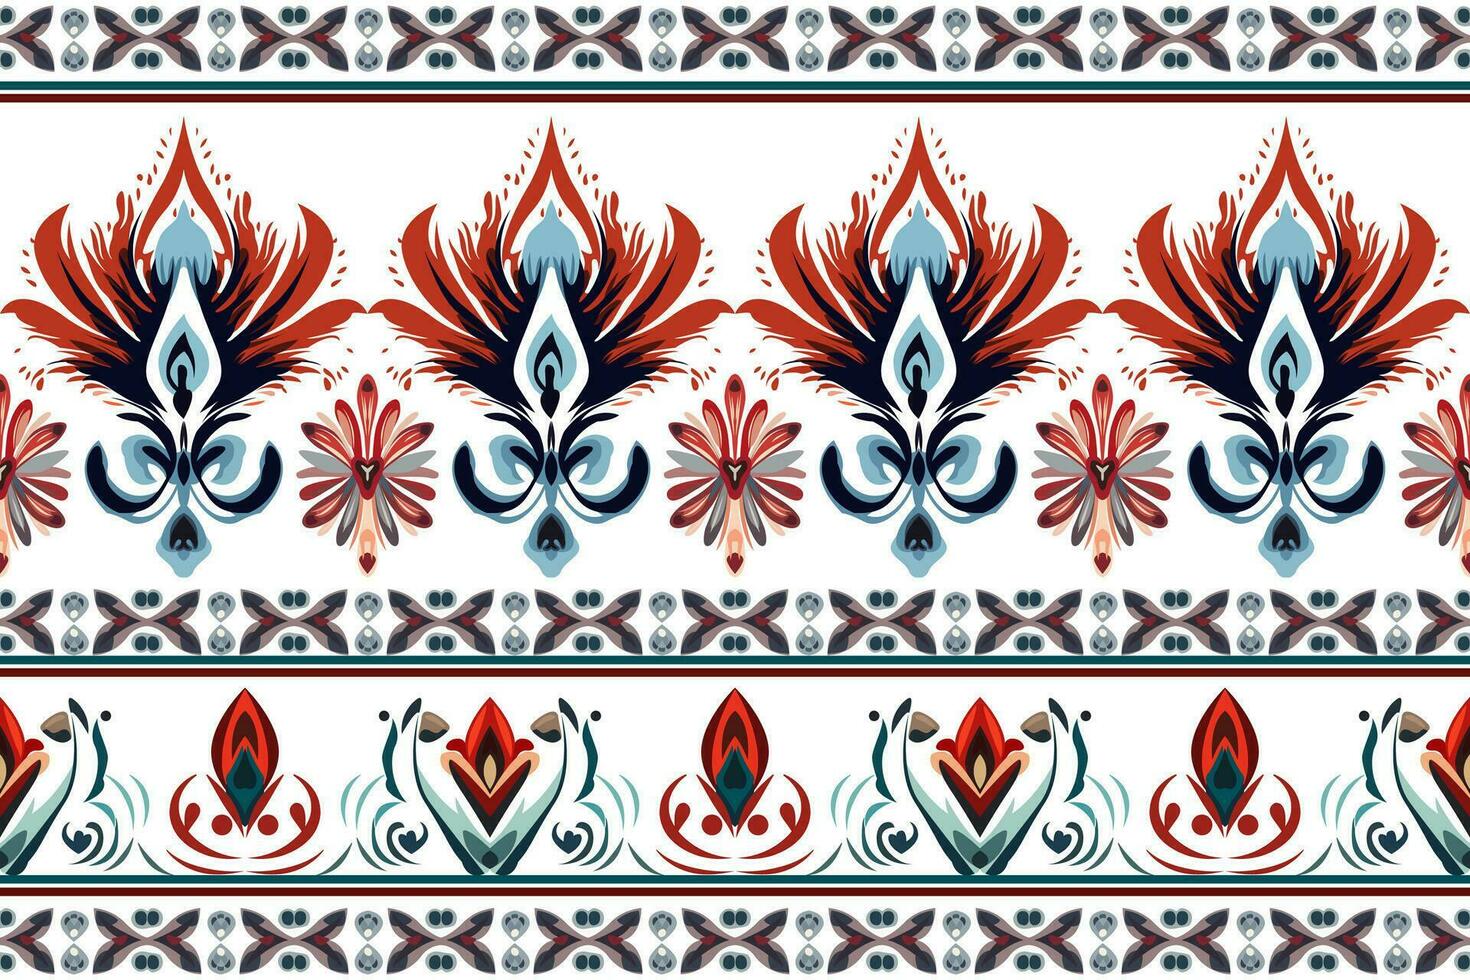 Abstract ethnic border patterns design. Aztec fabric textile mandala decorative. Tribal native motif traditional embroidery vector background